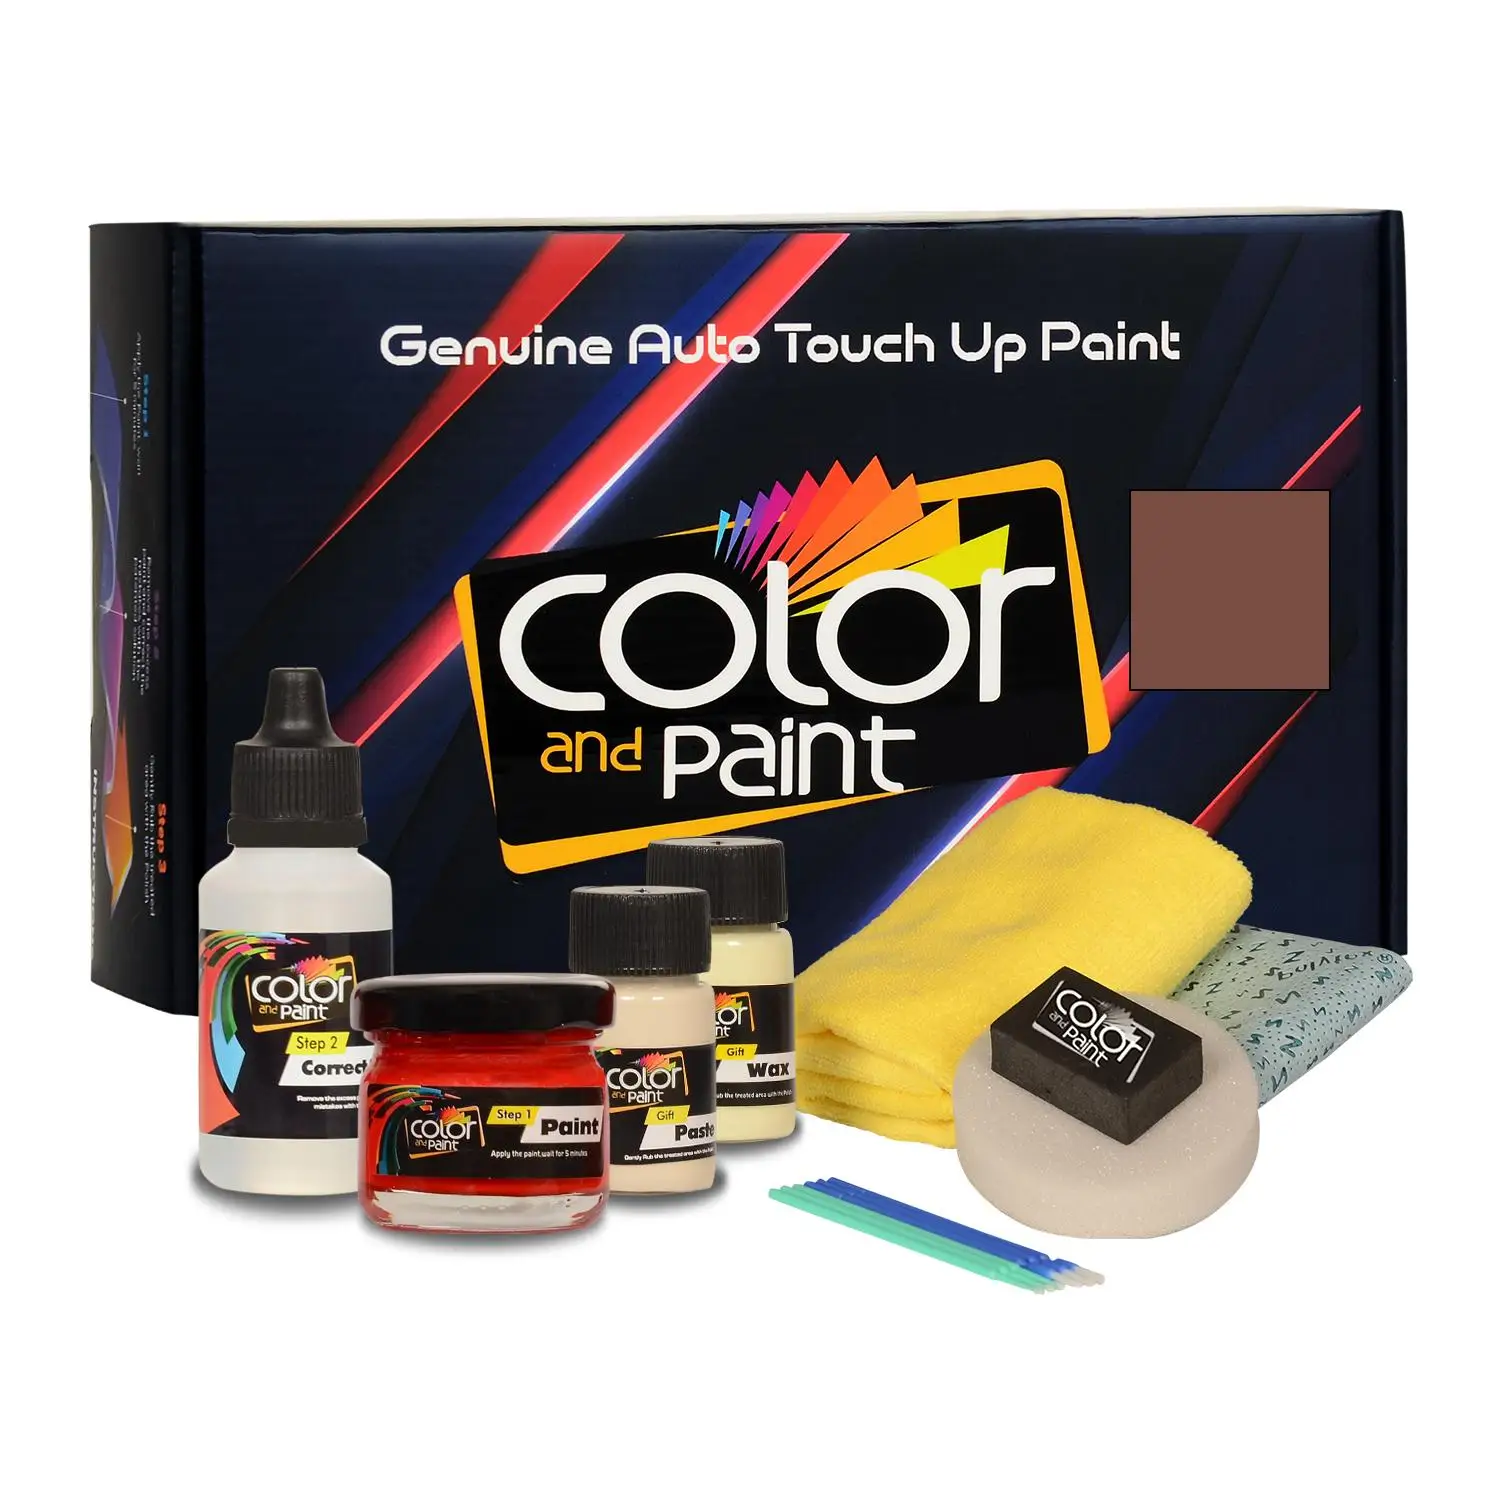 

Color and Paint compatible with Dodge Automotive Touch Up Paint - CHESTNUT BROWN MET - PU7 - Basic Care